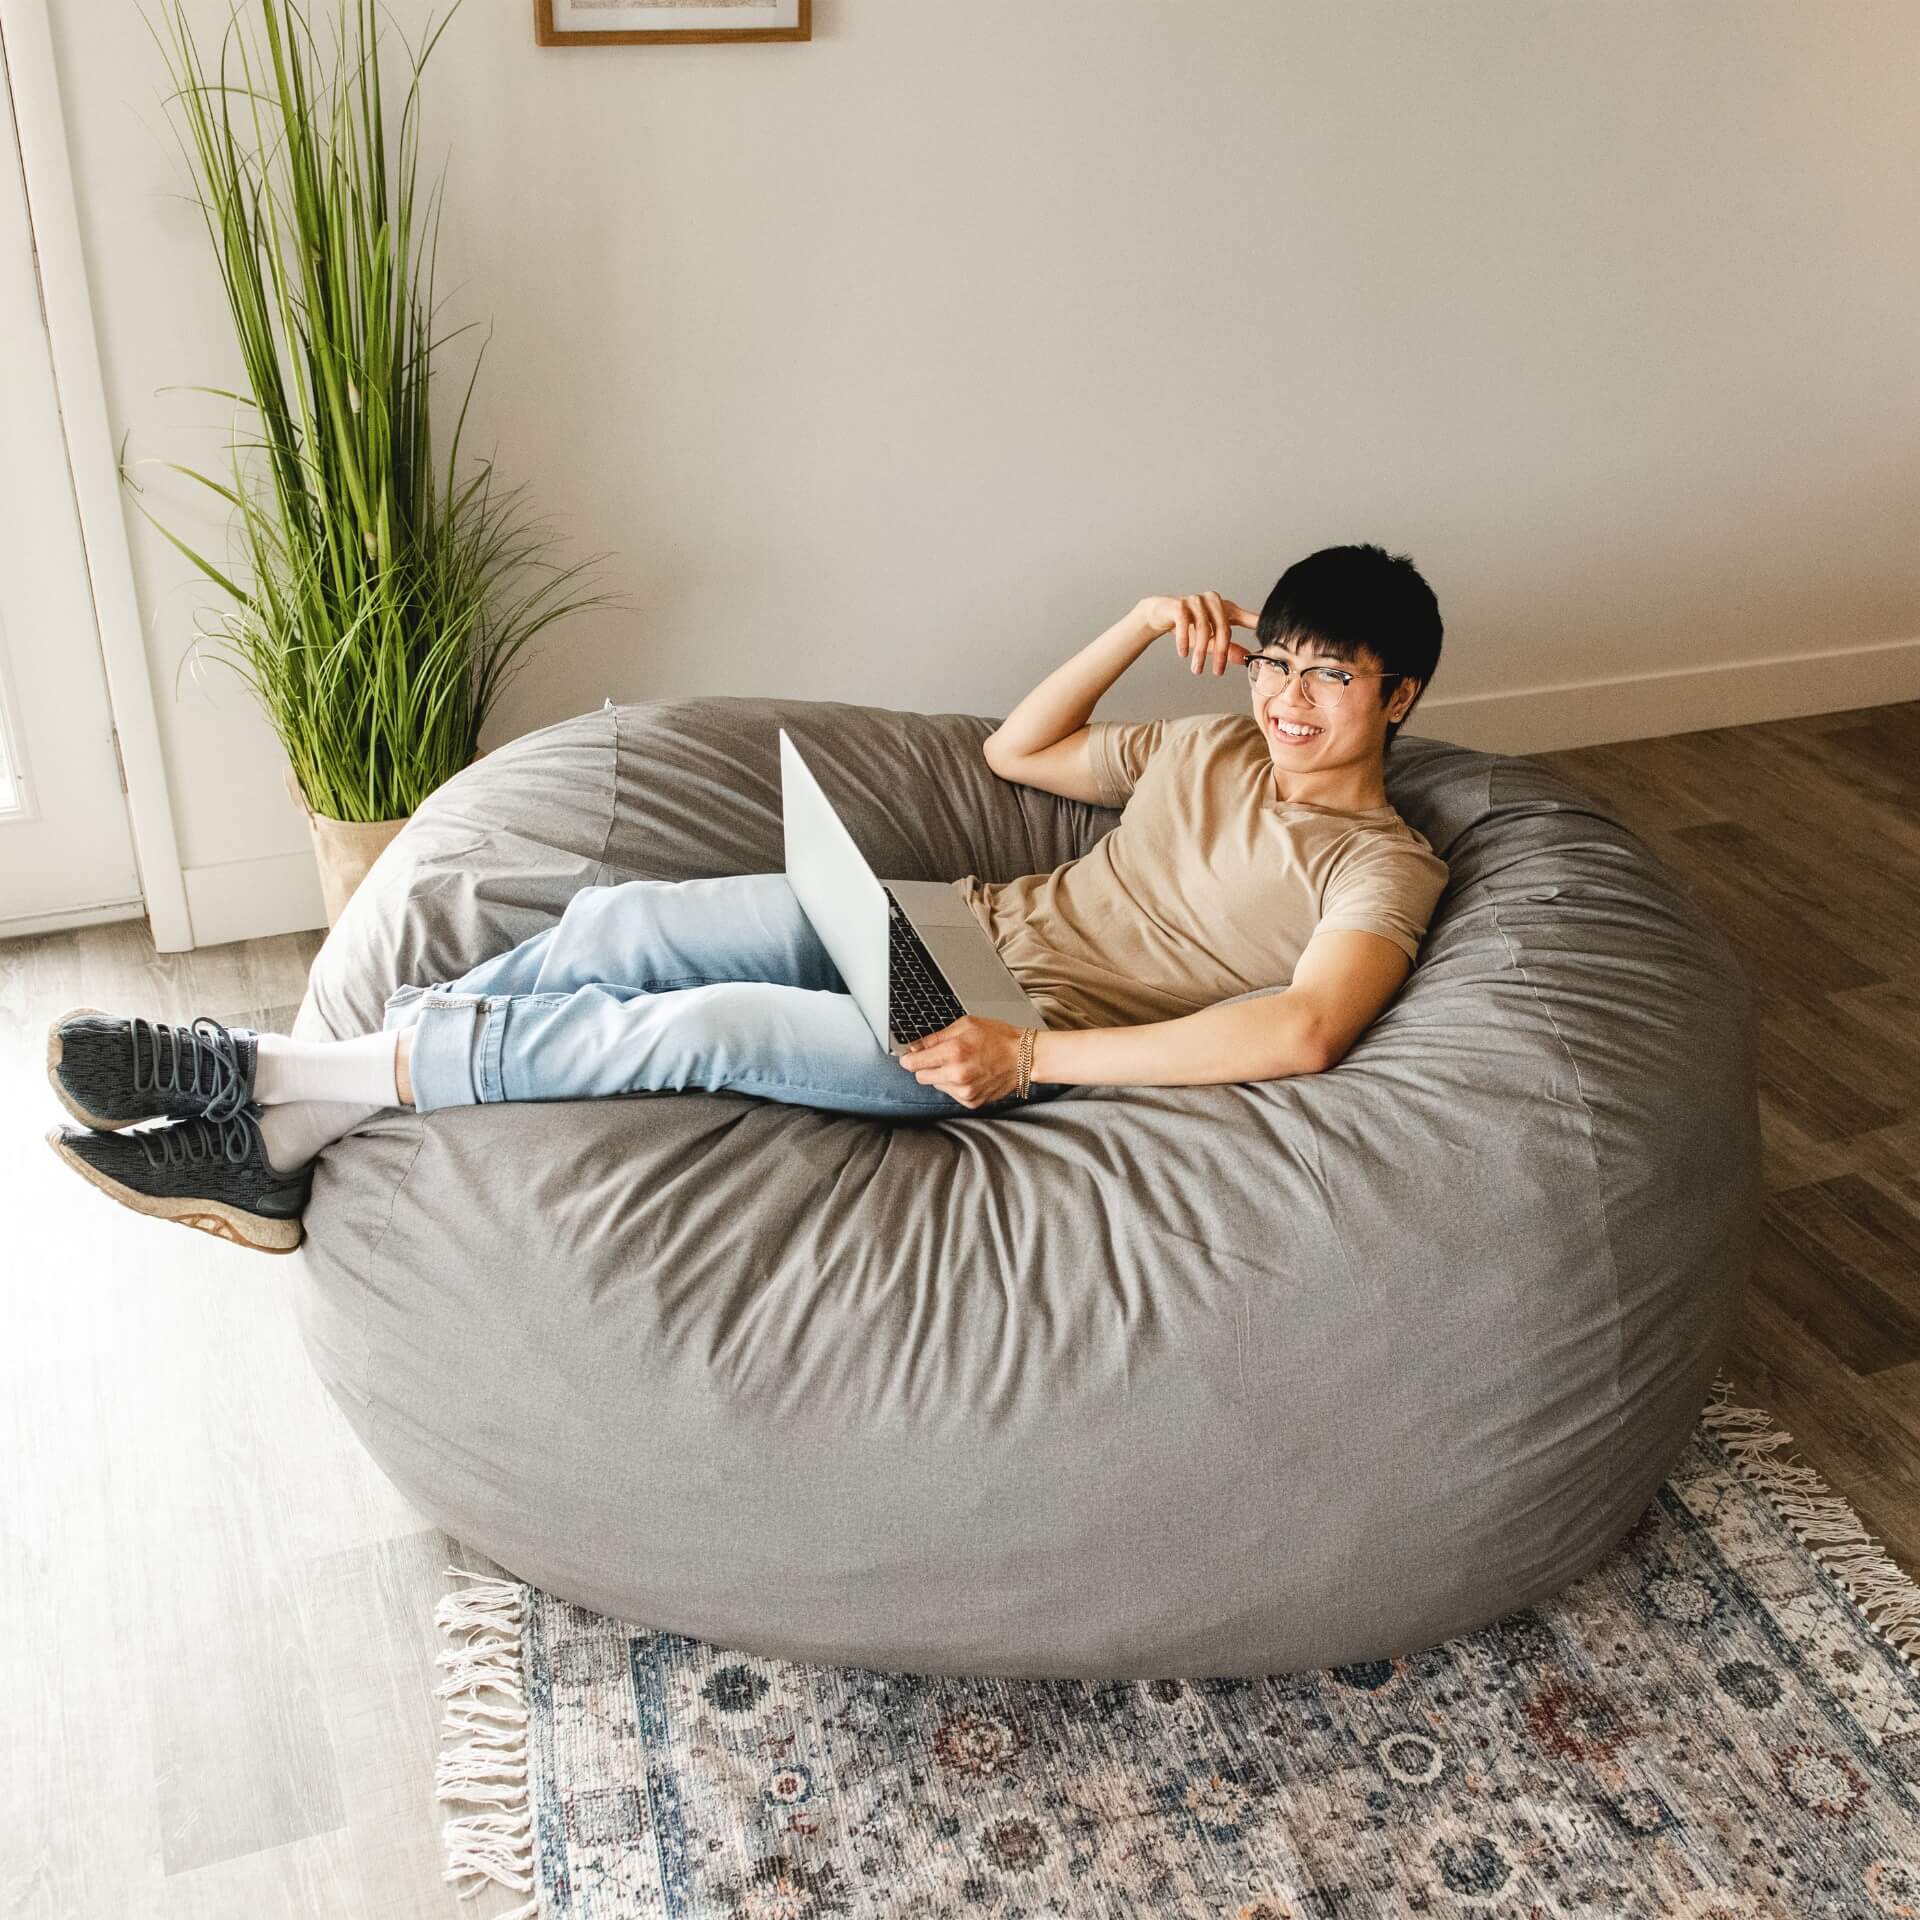 Bean Bag Guide | How to Buy, Use and Care for Bean Bag Chairs – Safomasi